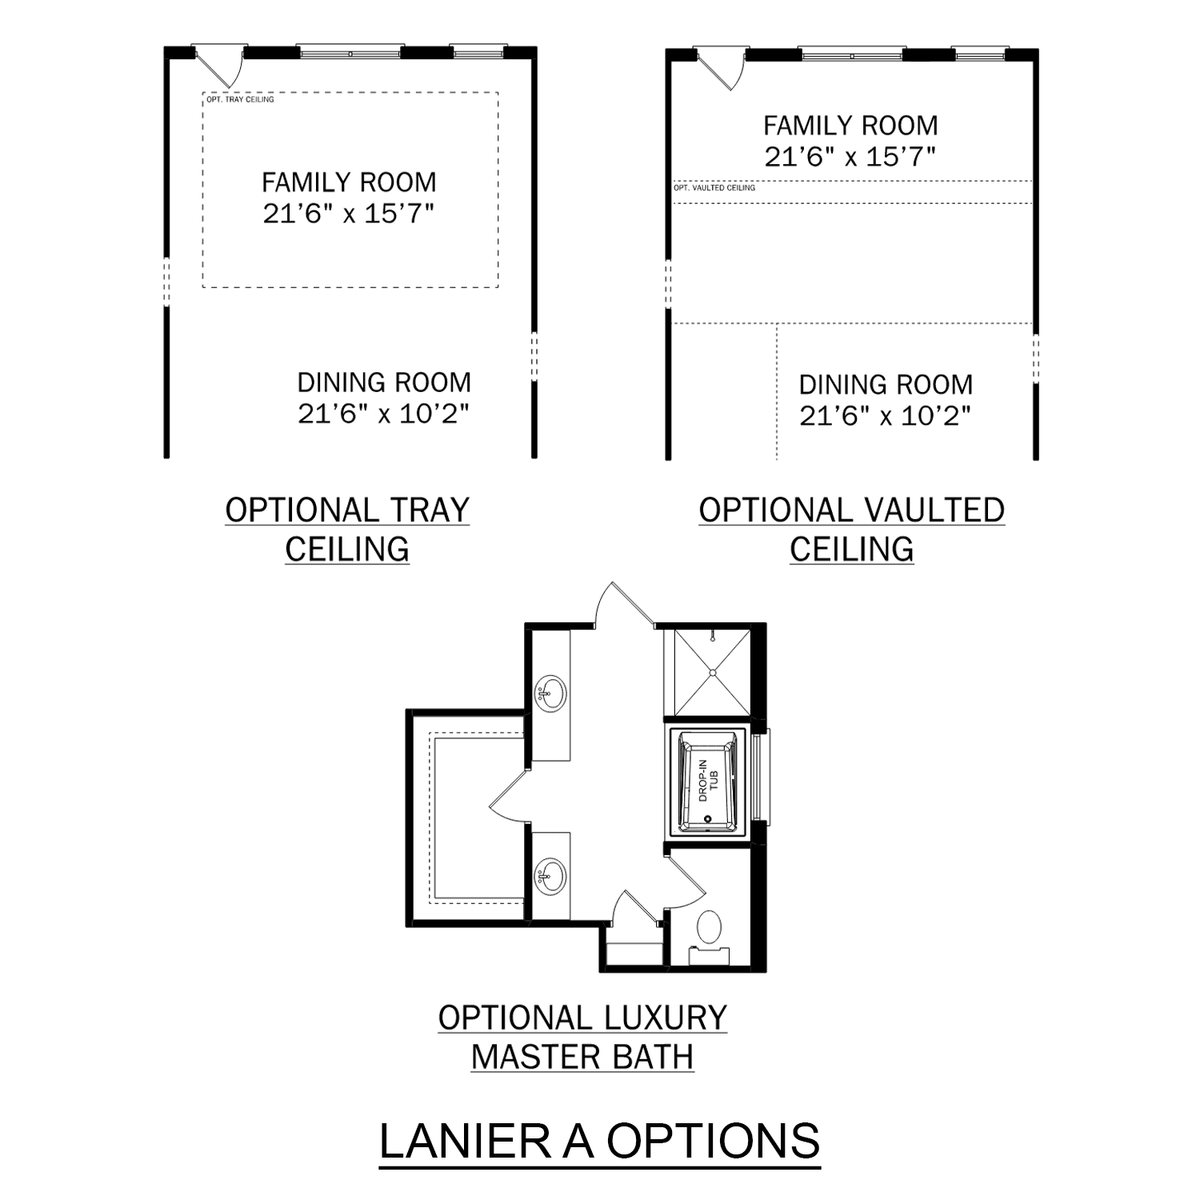 2 - The Lanier floor plan layout for 107 Ackert Drive in Davidson Homes' Pikes Ridge community.